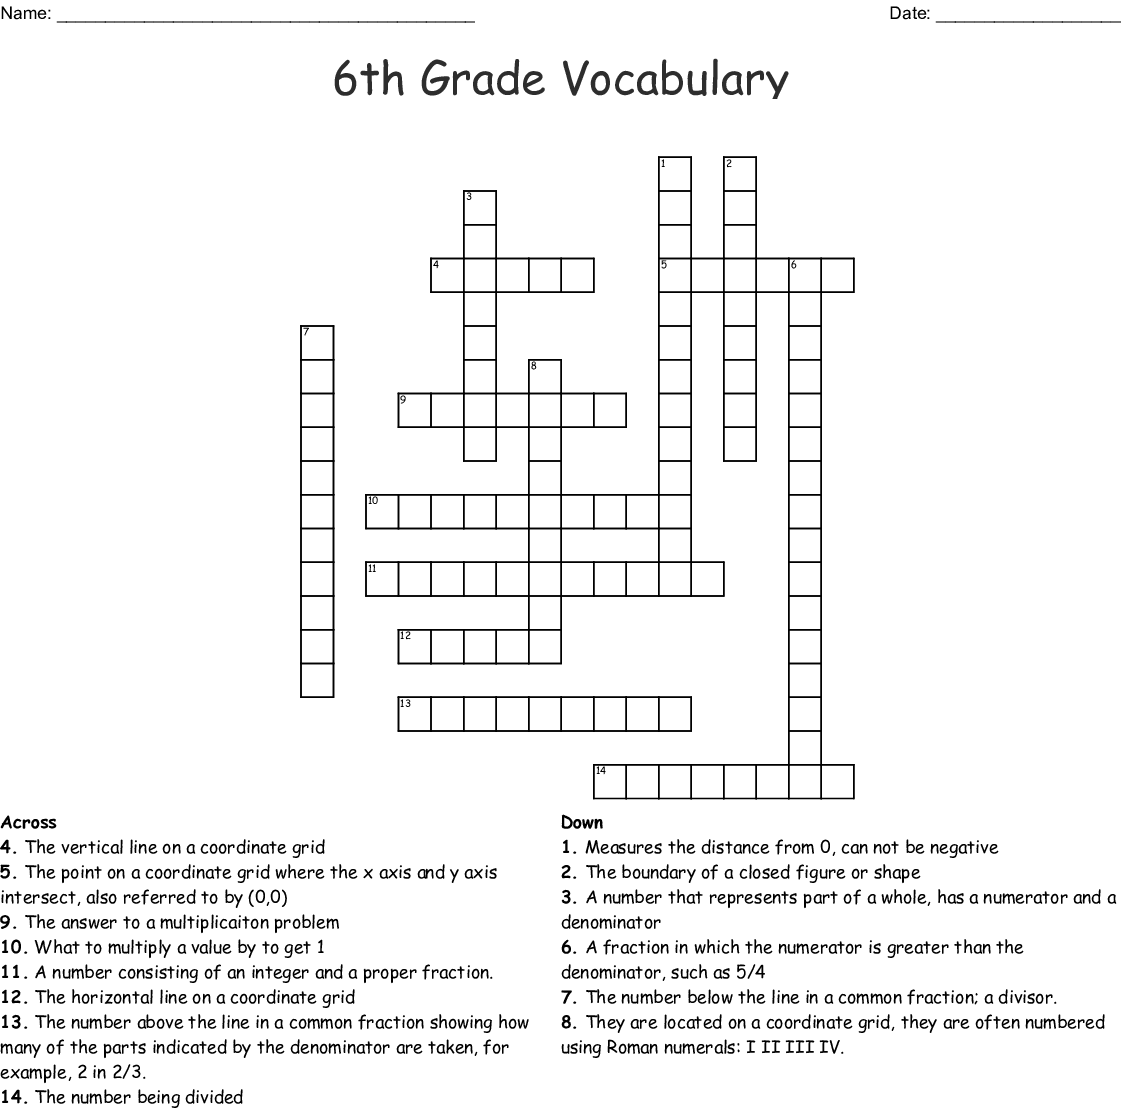 Printable Crossword Puzzles For 6th Grade